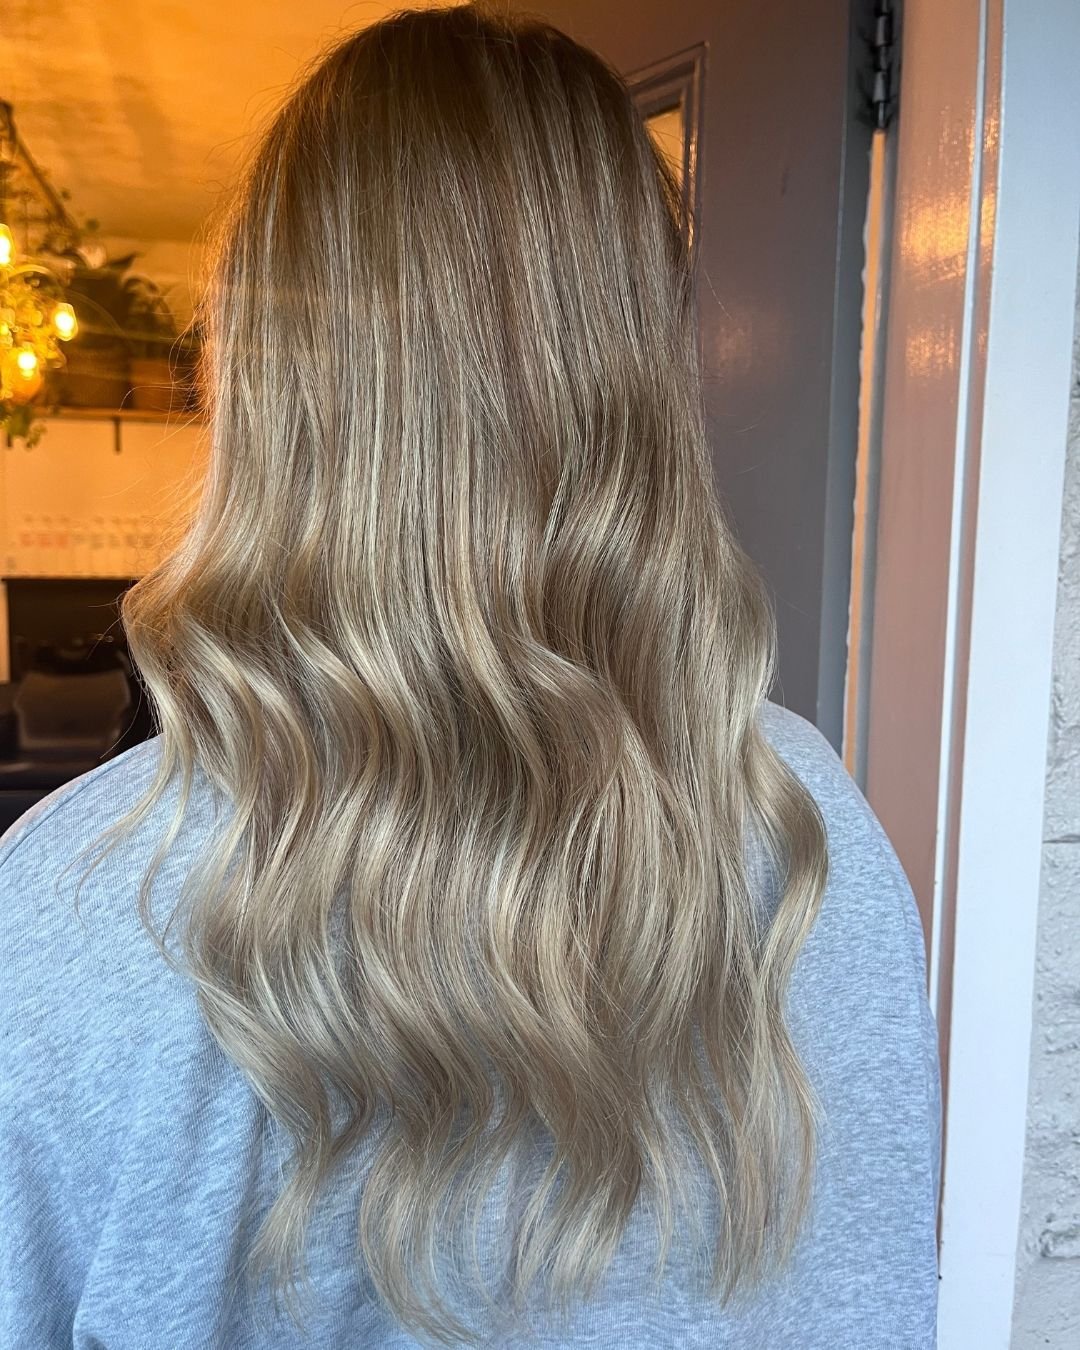 Stunning &amp; Natural ✨ The best option if you don't want the hassle of harsh regrowth but want a fresh, highlighted balayage 💛

Created by Tyra ~ Book your next appointment with Tyra at www.arrowtownhair.nz or 03 442 0515 ✨

#natural #blonde #bala